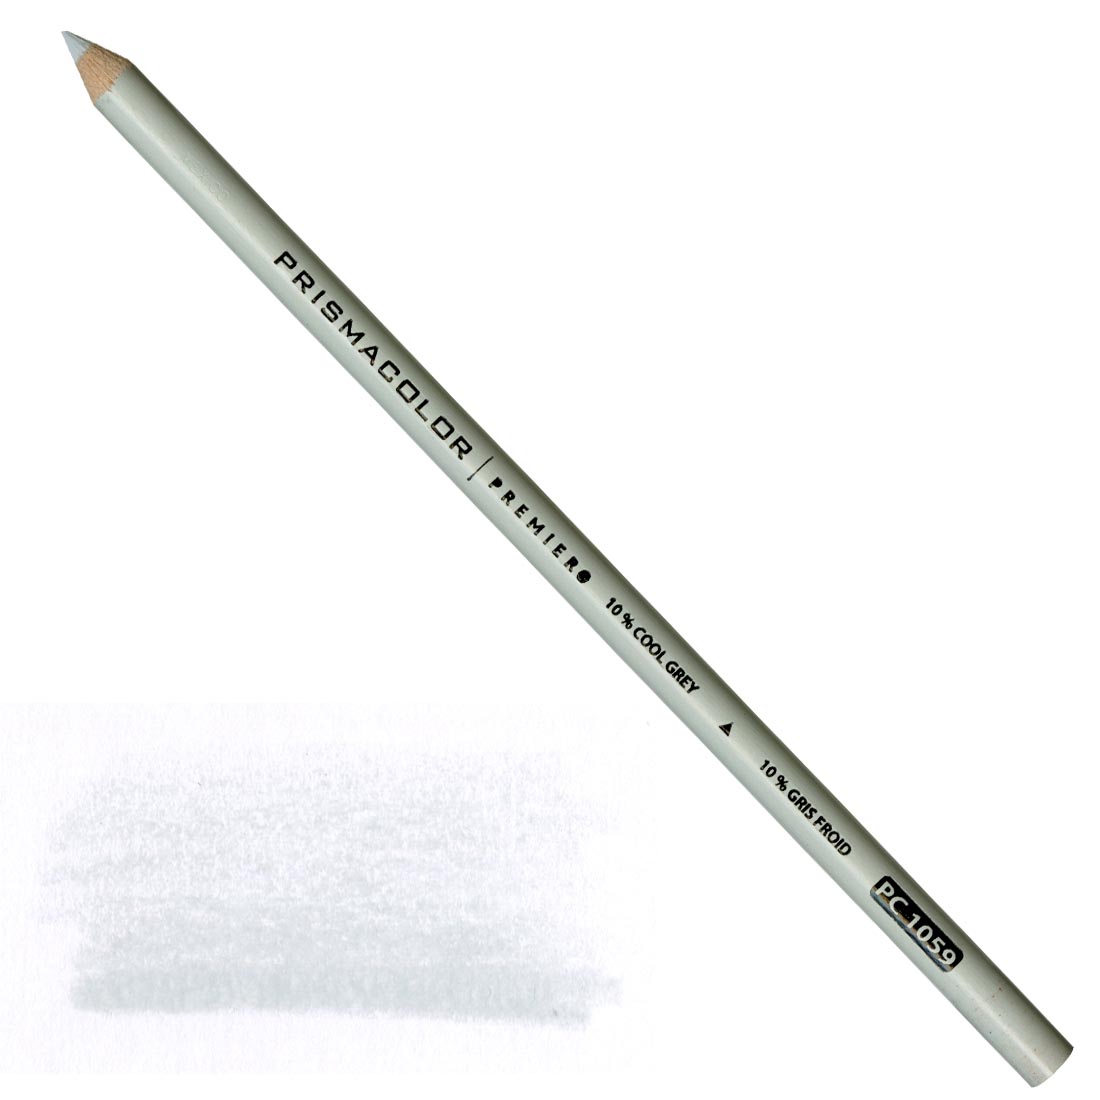 10% Cool Grey Prismacolor Premier Colored Pencil with a sample colored swatch